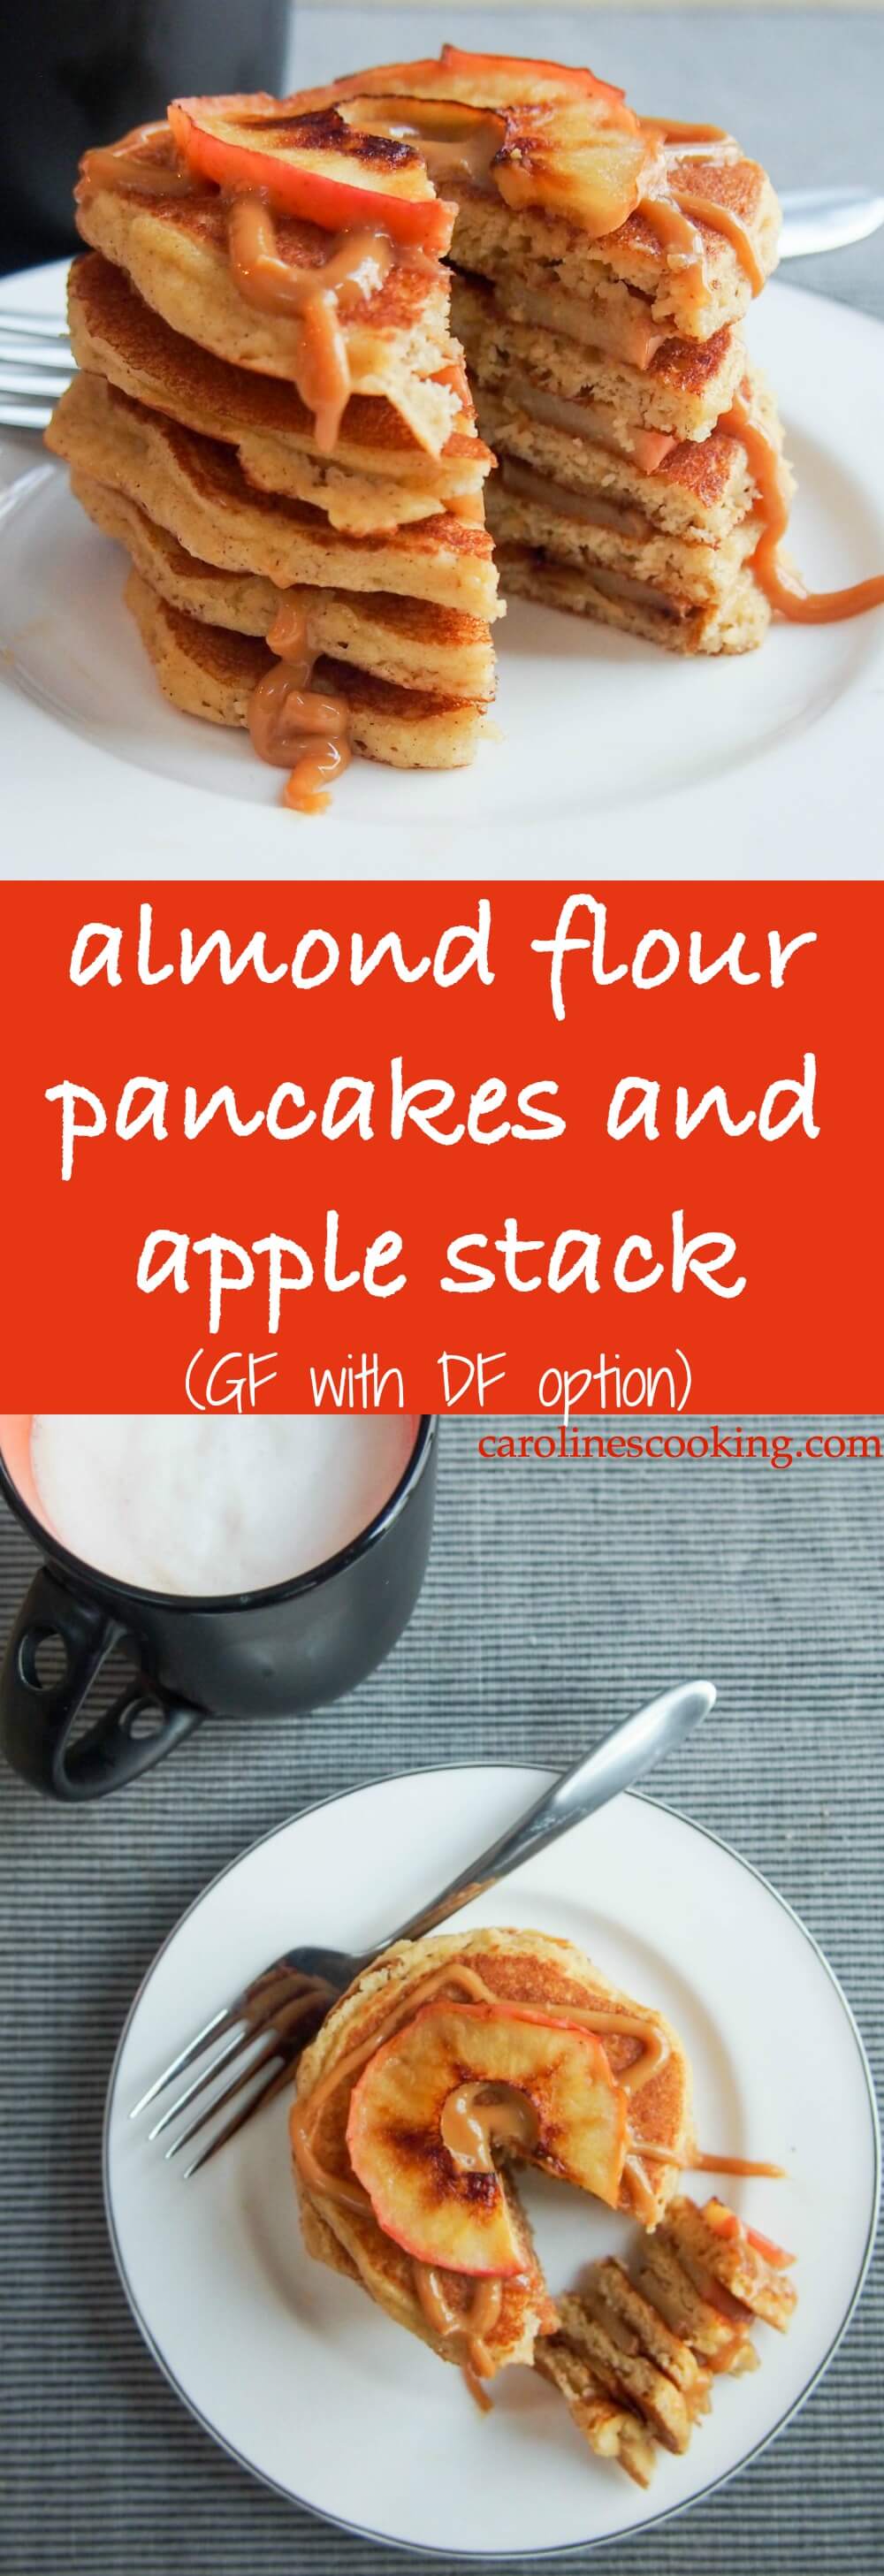 Almond flour pancakes and apple stack (GF with DF option) - Almond flour pancakes are easy to make and very light.  With a tasty almond flavor, they're gluten free and dairy free.  Enjoy with fruit, syrup and more, they're a taste breakfast.